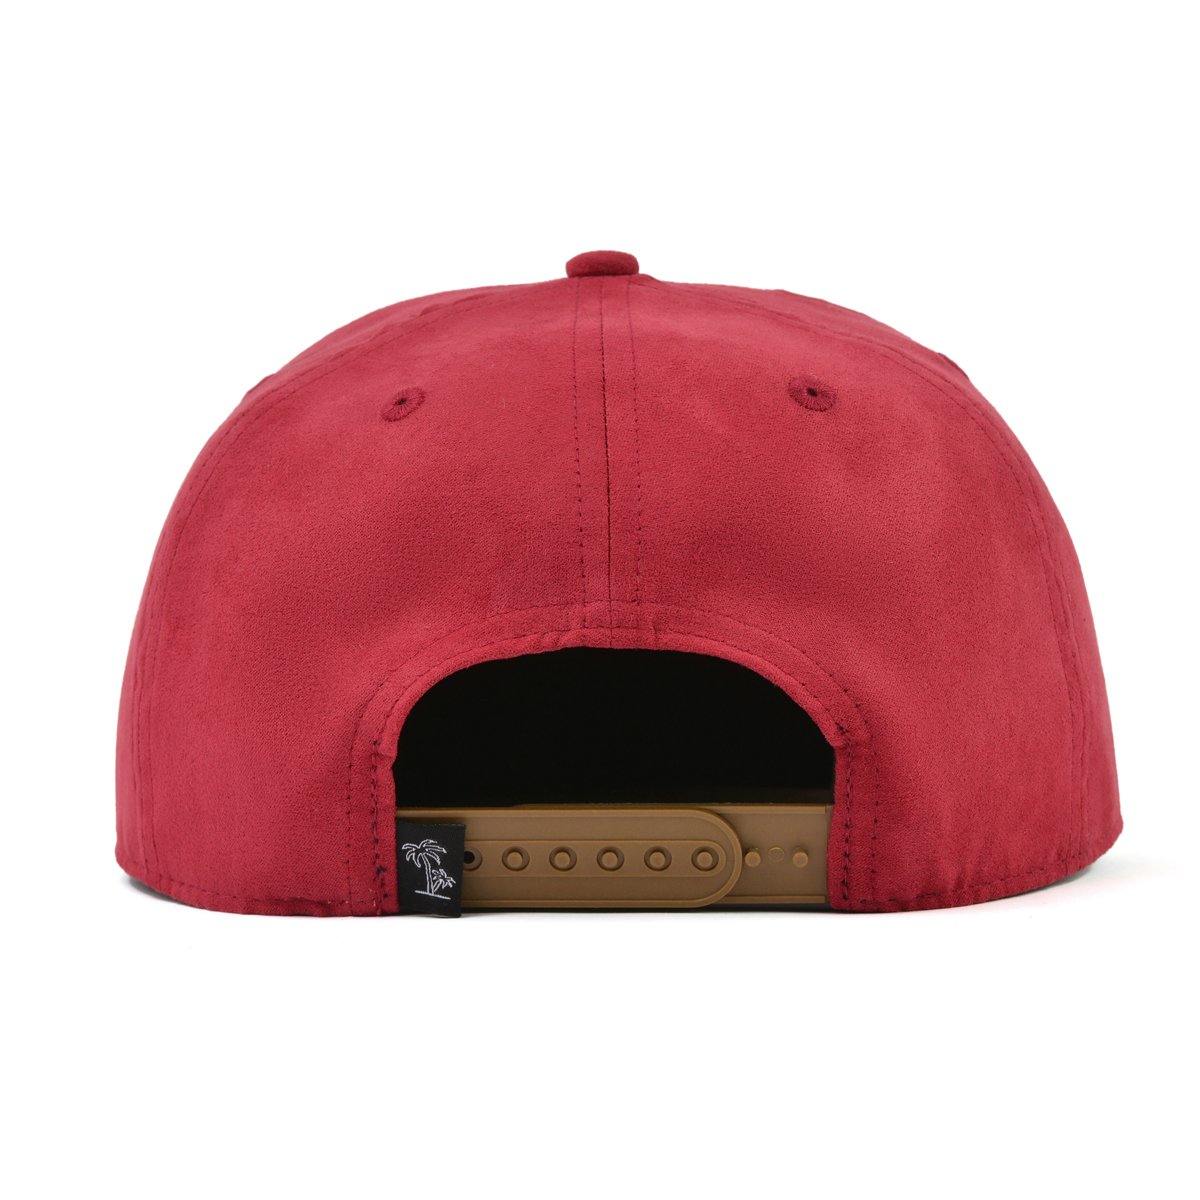 Suede red snapback hat for babies, toddlers, kids and men. Cubs & Co. Australia